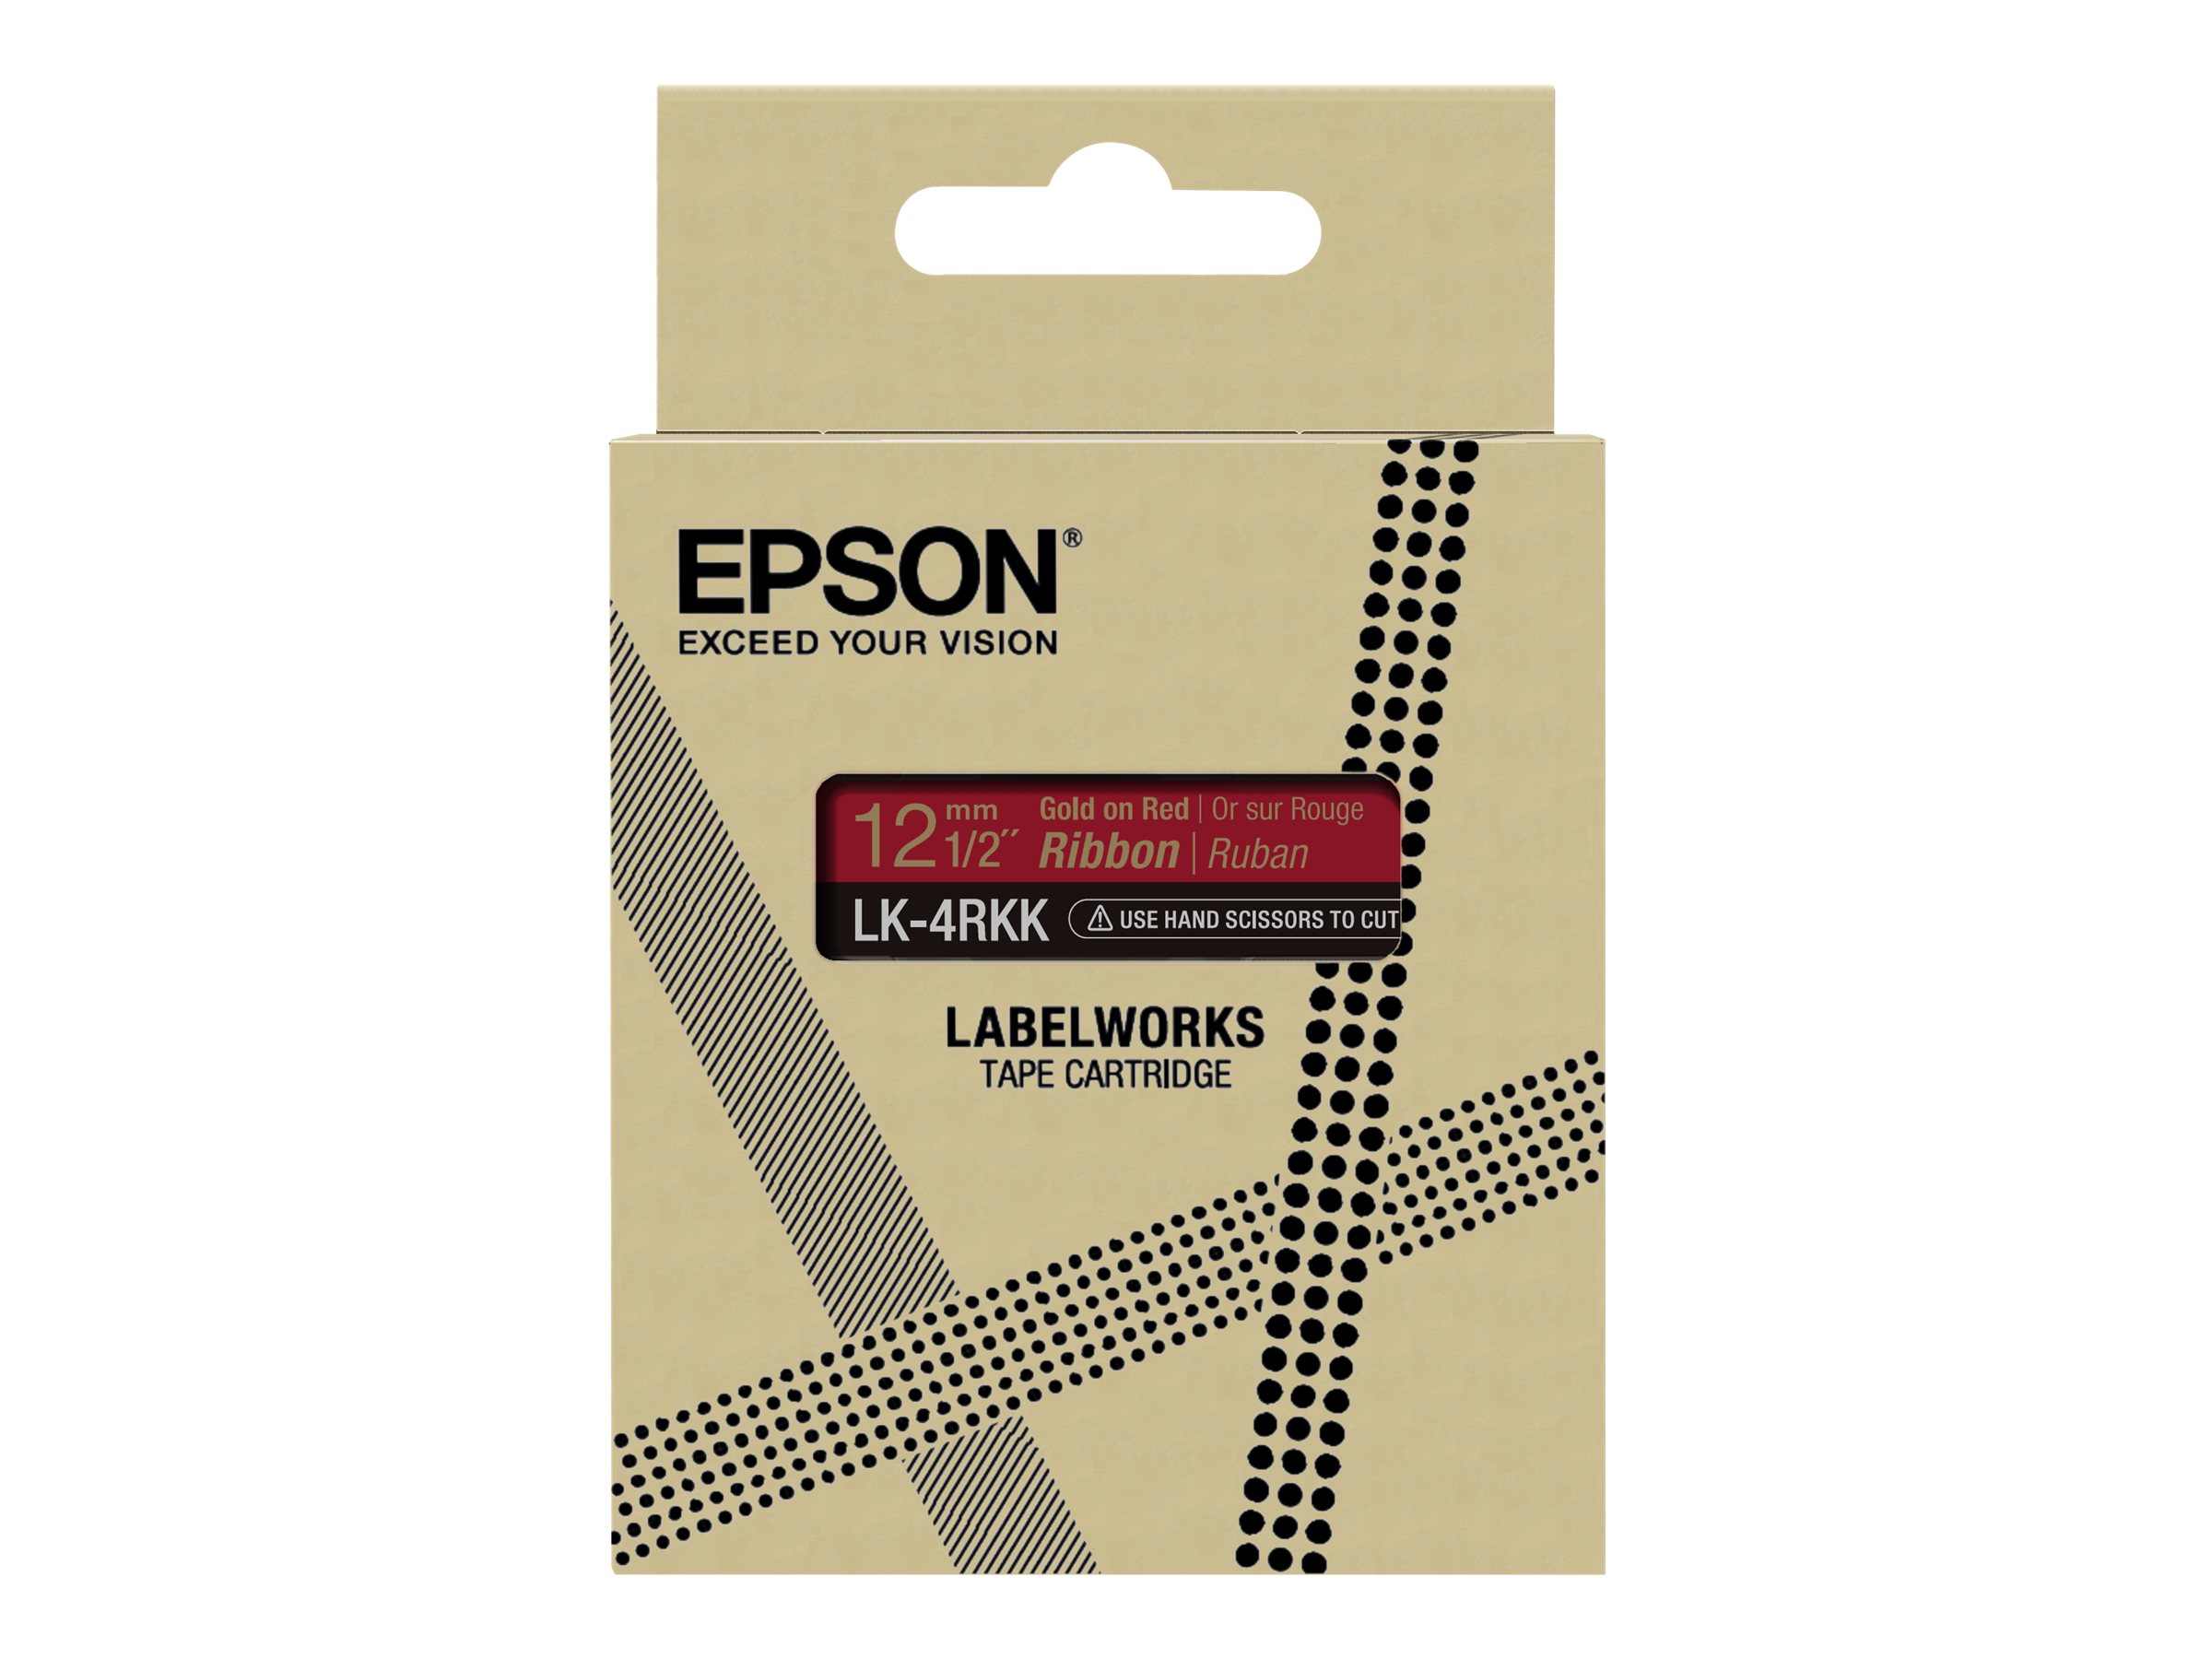 Epson LabelWorks LK-4RKK - Seidig - Gold auf Rot - Rolle (1,2 cm x 5 m) 1 Kassette(n) Band - fr LabelWorks Cable and Wiring Kit